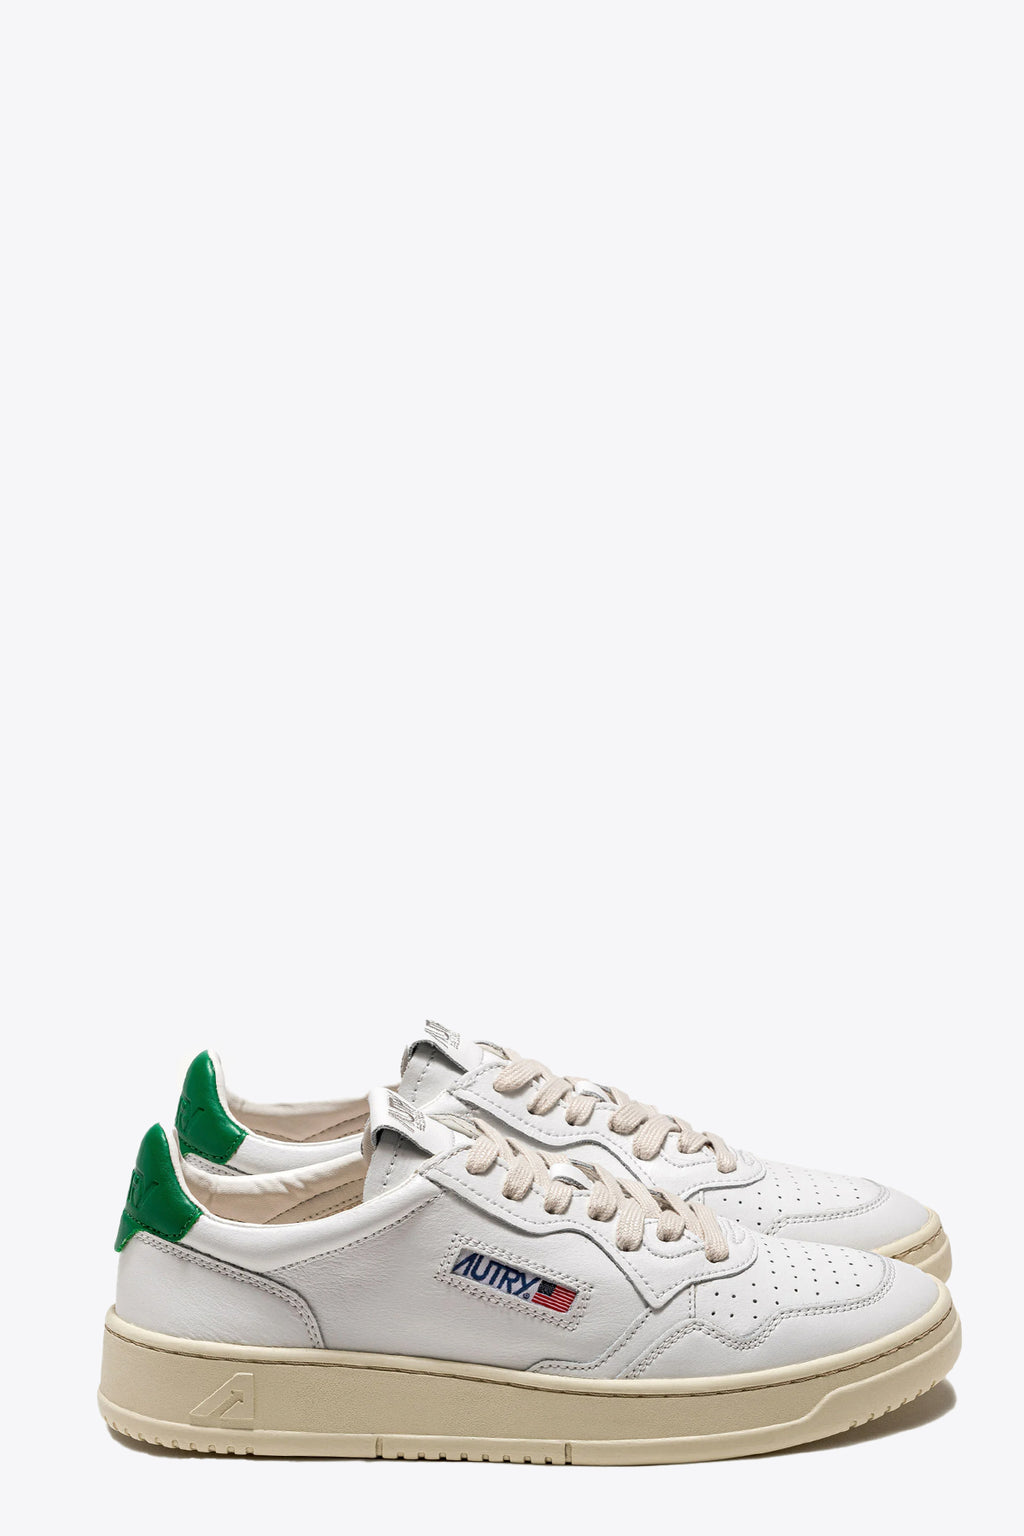 alt-image__White-leather-low-sneaker-with-green-back-tab---Medalist